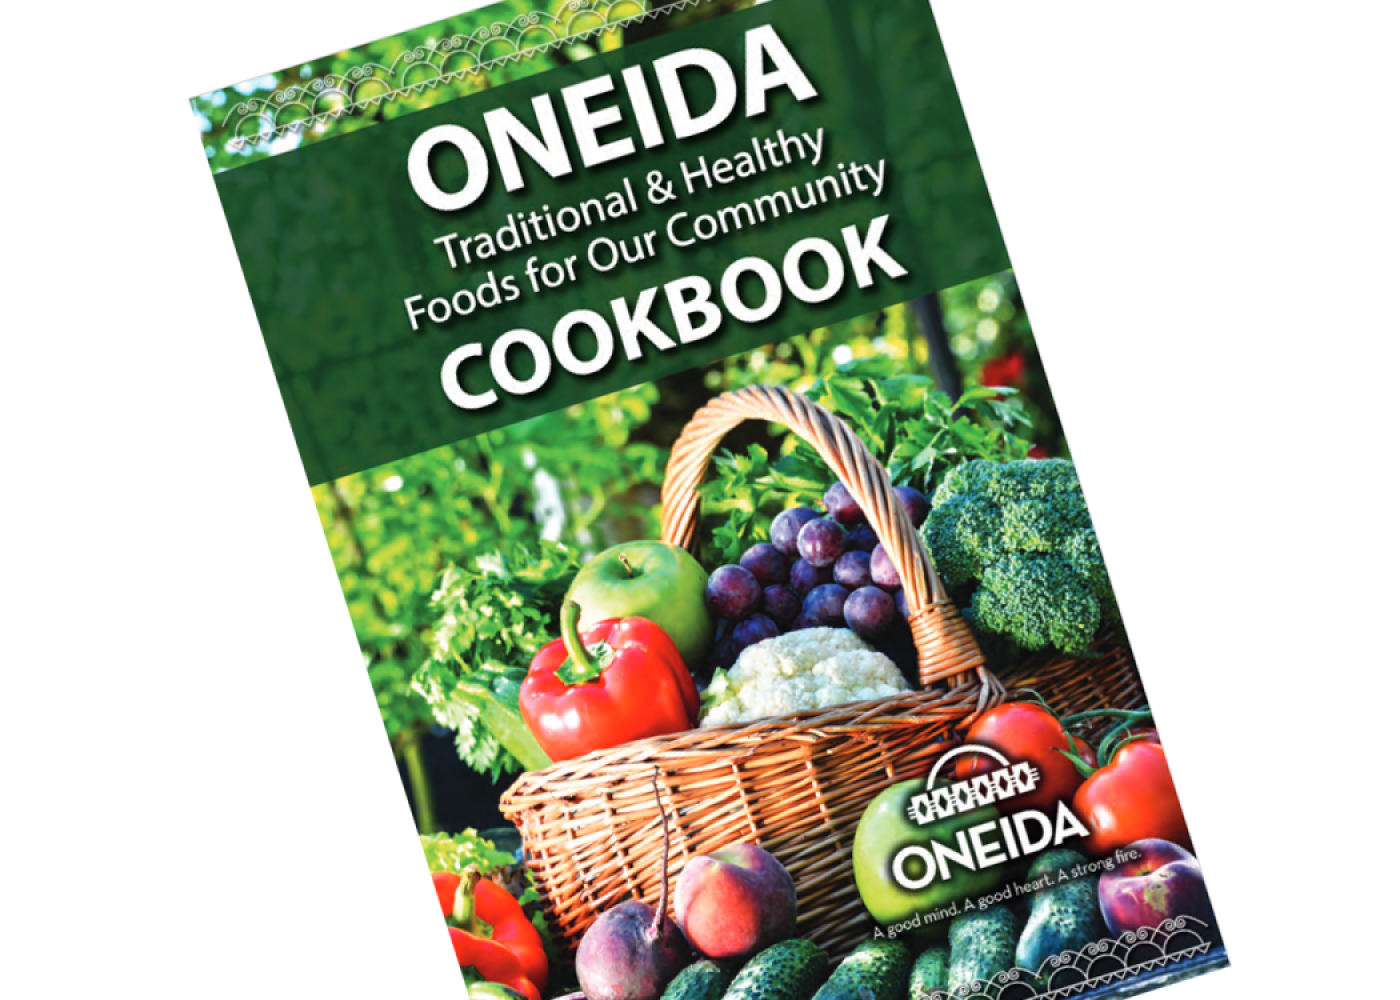 Oneida Cookbook Traditional & Healthy Foods for our Community cookbook cover with a basket of fresh fruits and vegetables. A good mind. A good heart. A strong fire.